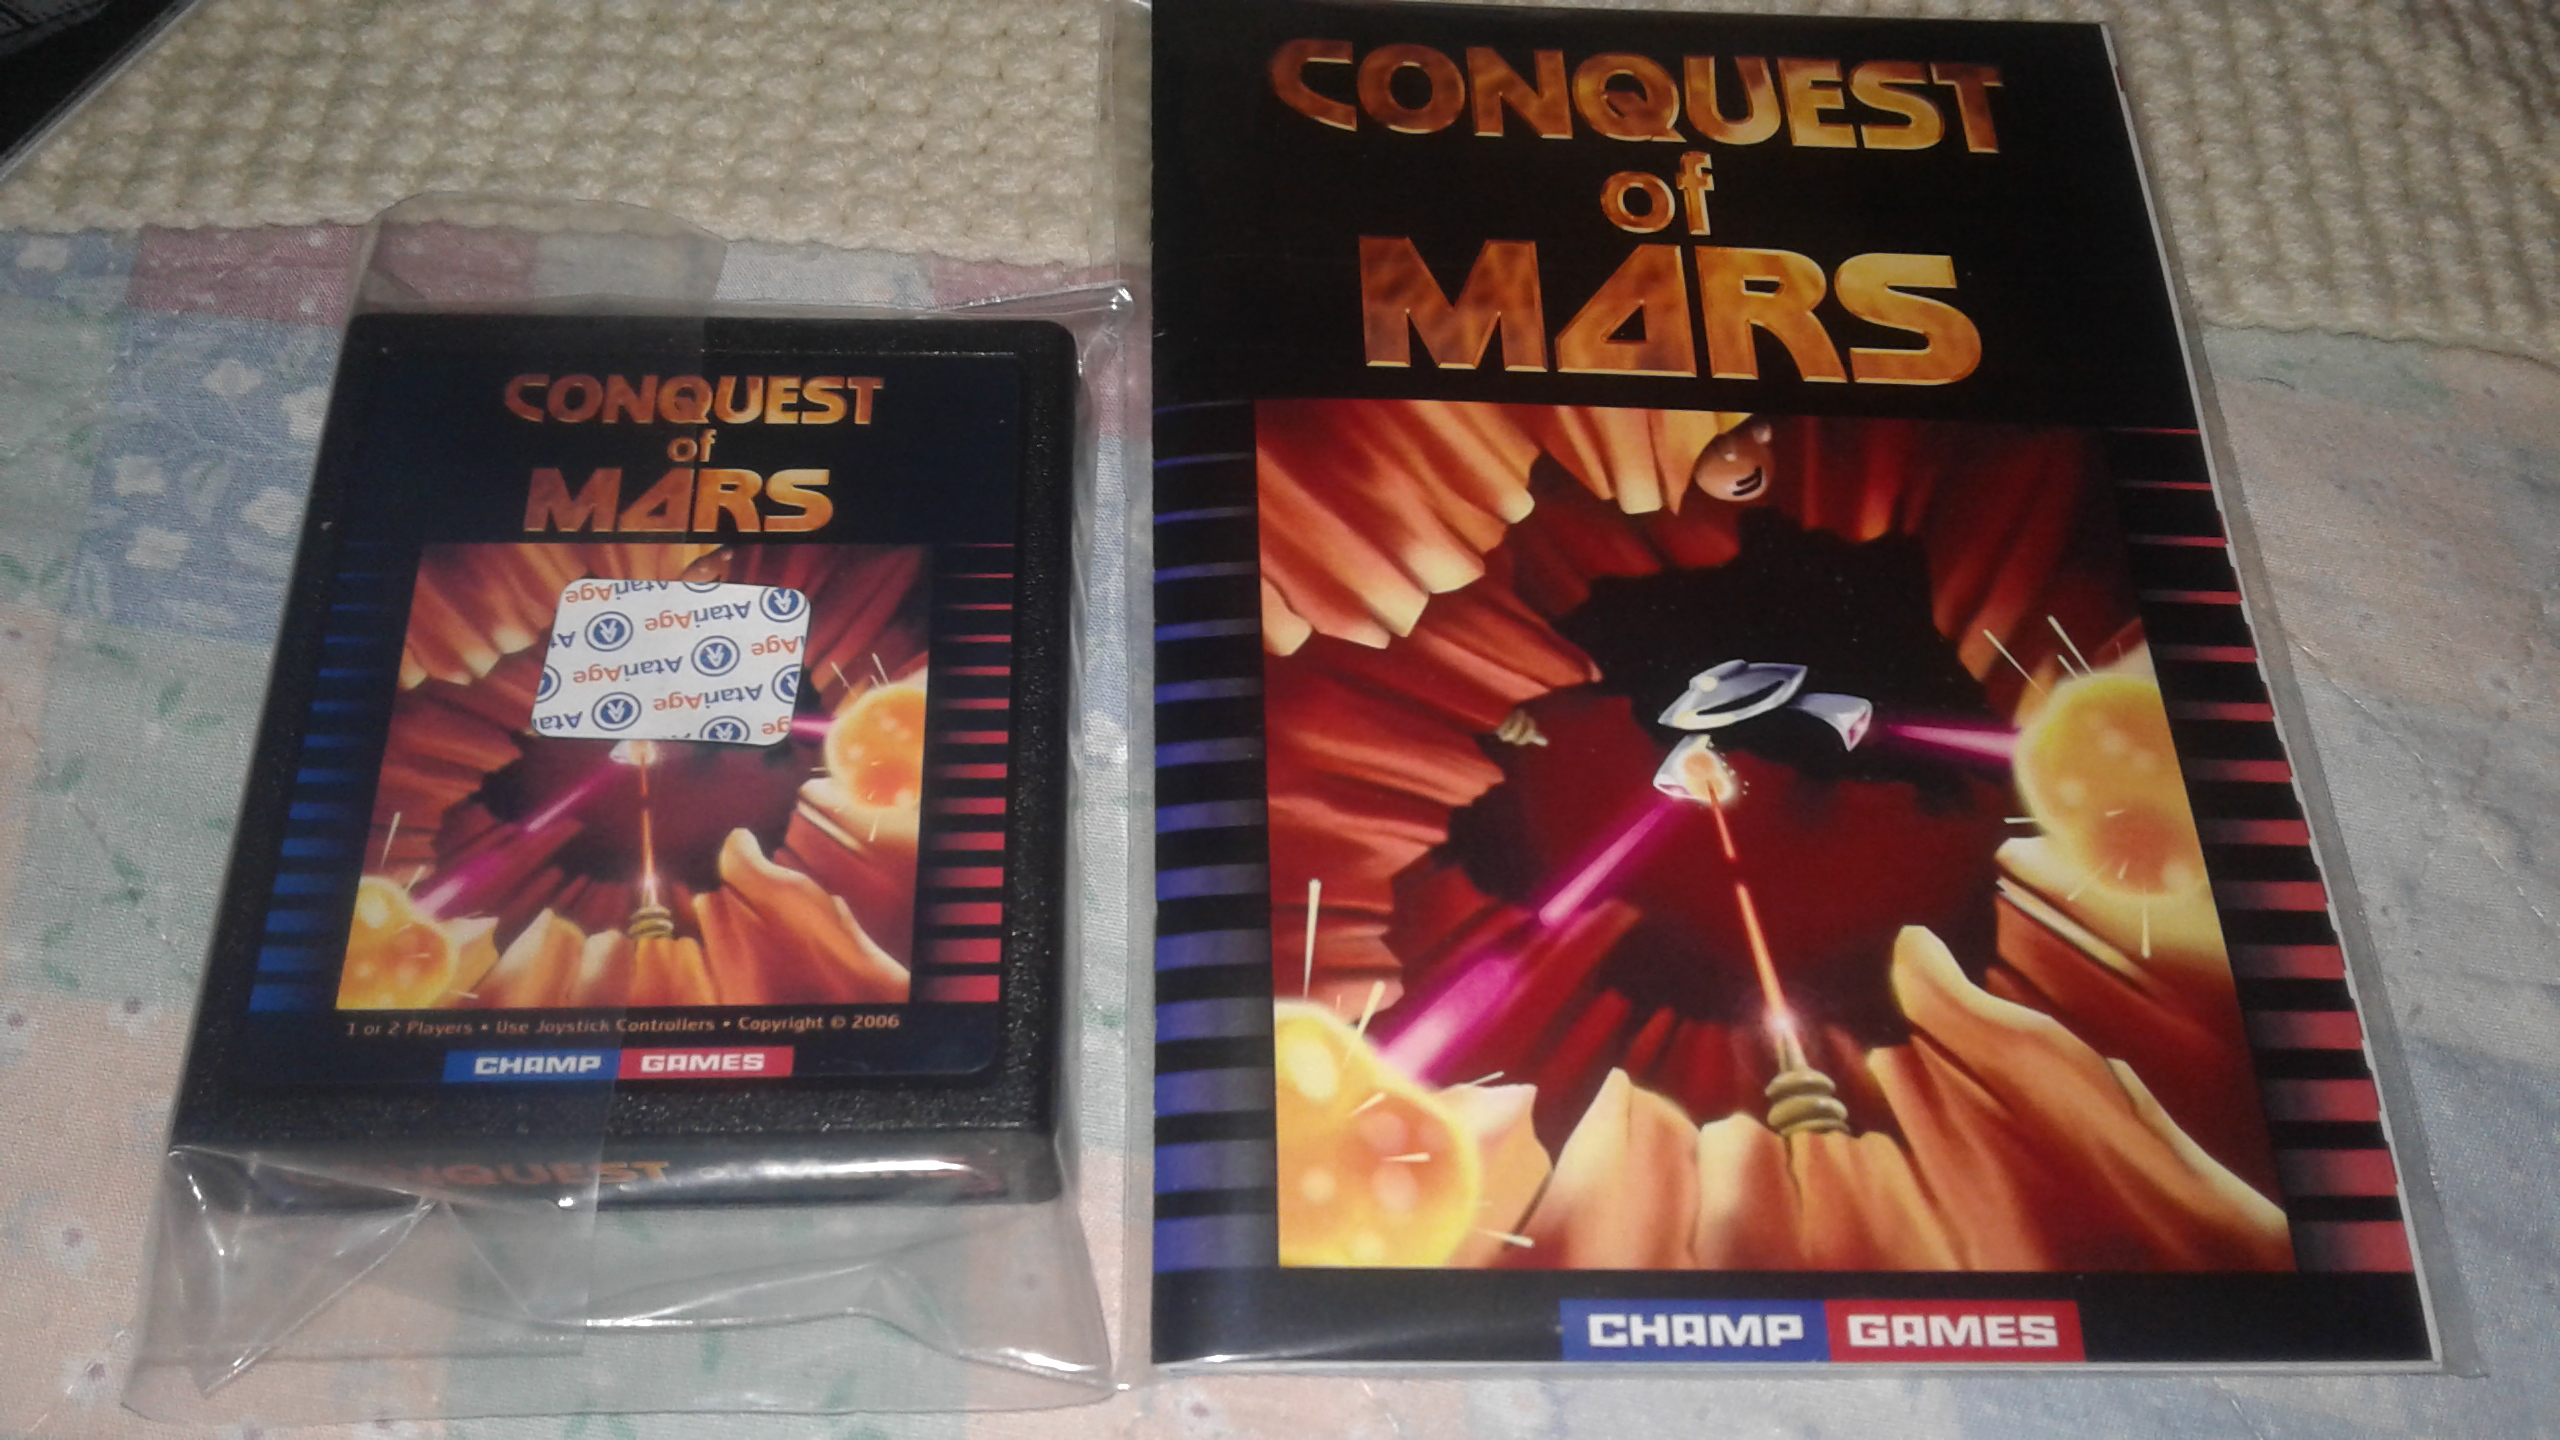 Mark: Conquest of Mars: Pilot (Atari 2600 Expert/A) 13,830 points on 2019-03-06 00:54:20